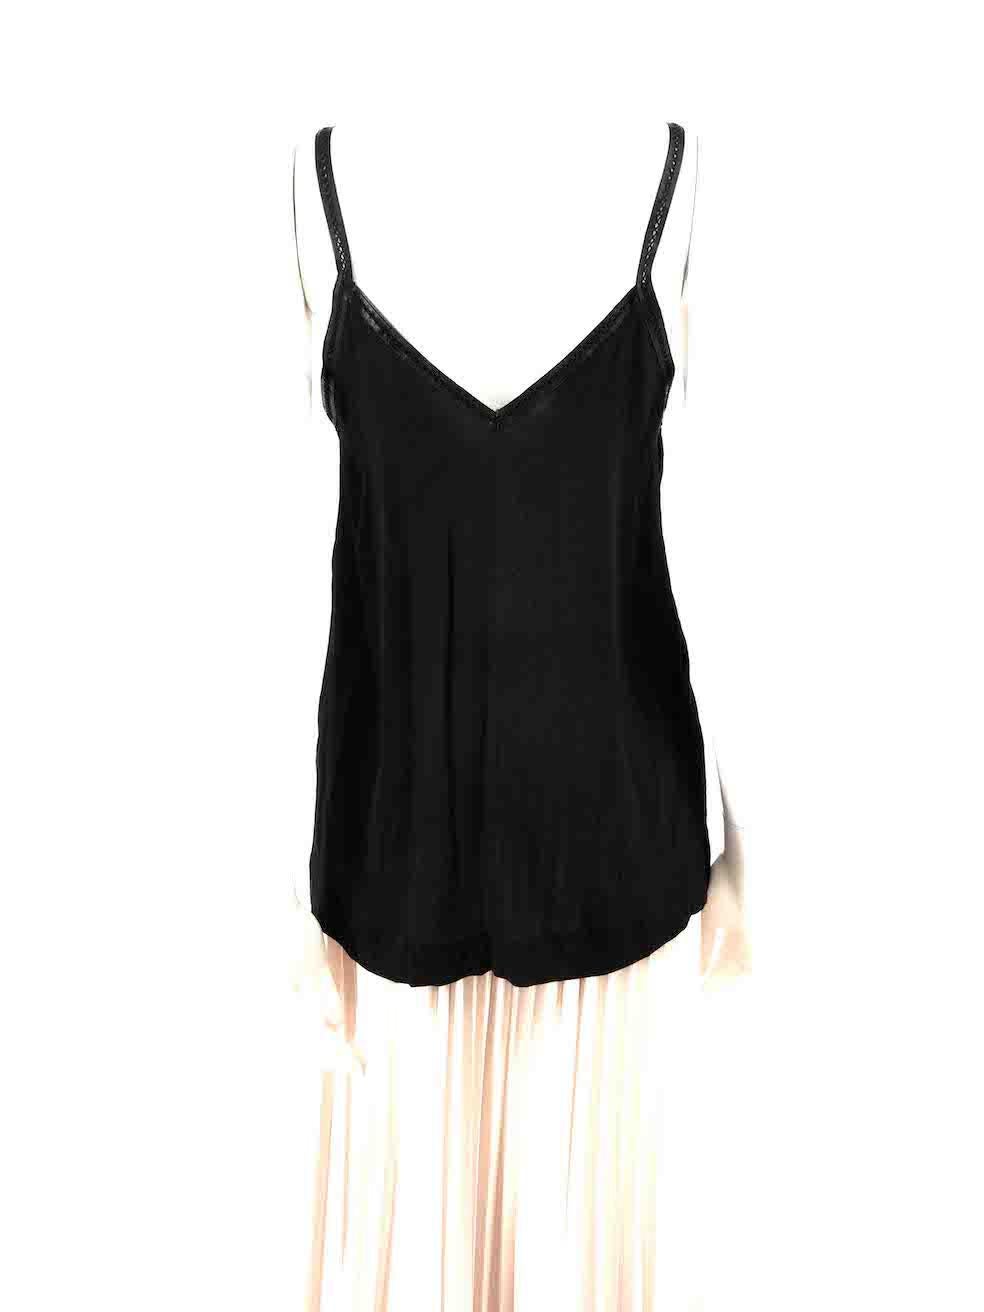 Maje Black Lace Trim Camisole Size L In Good Condition For Sale In London, GB